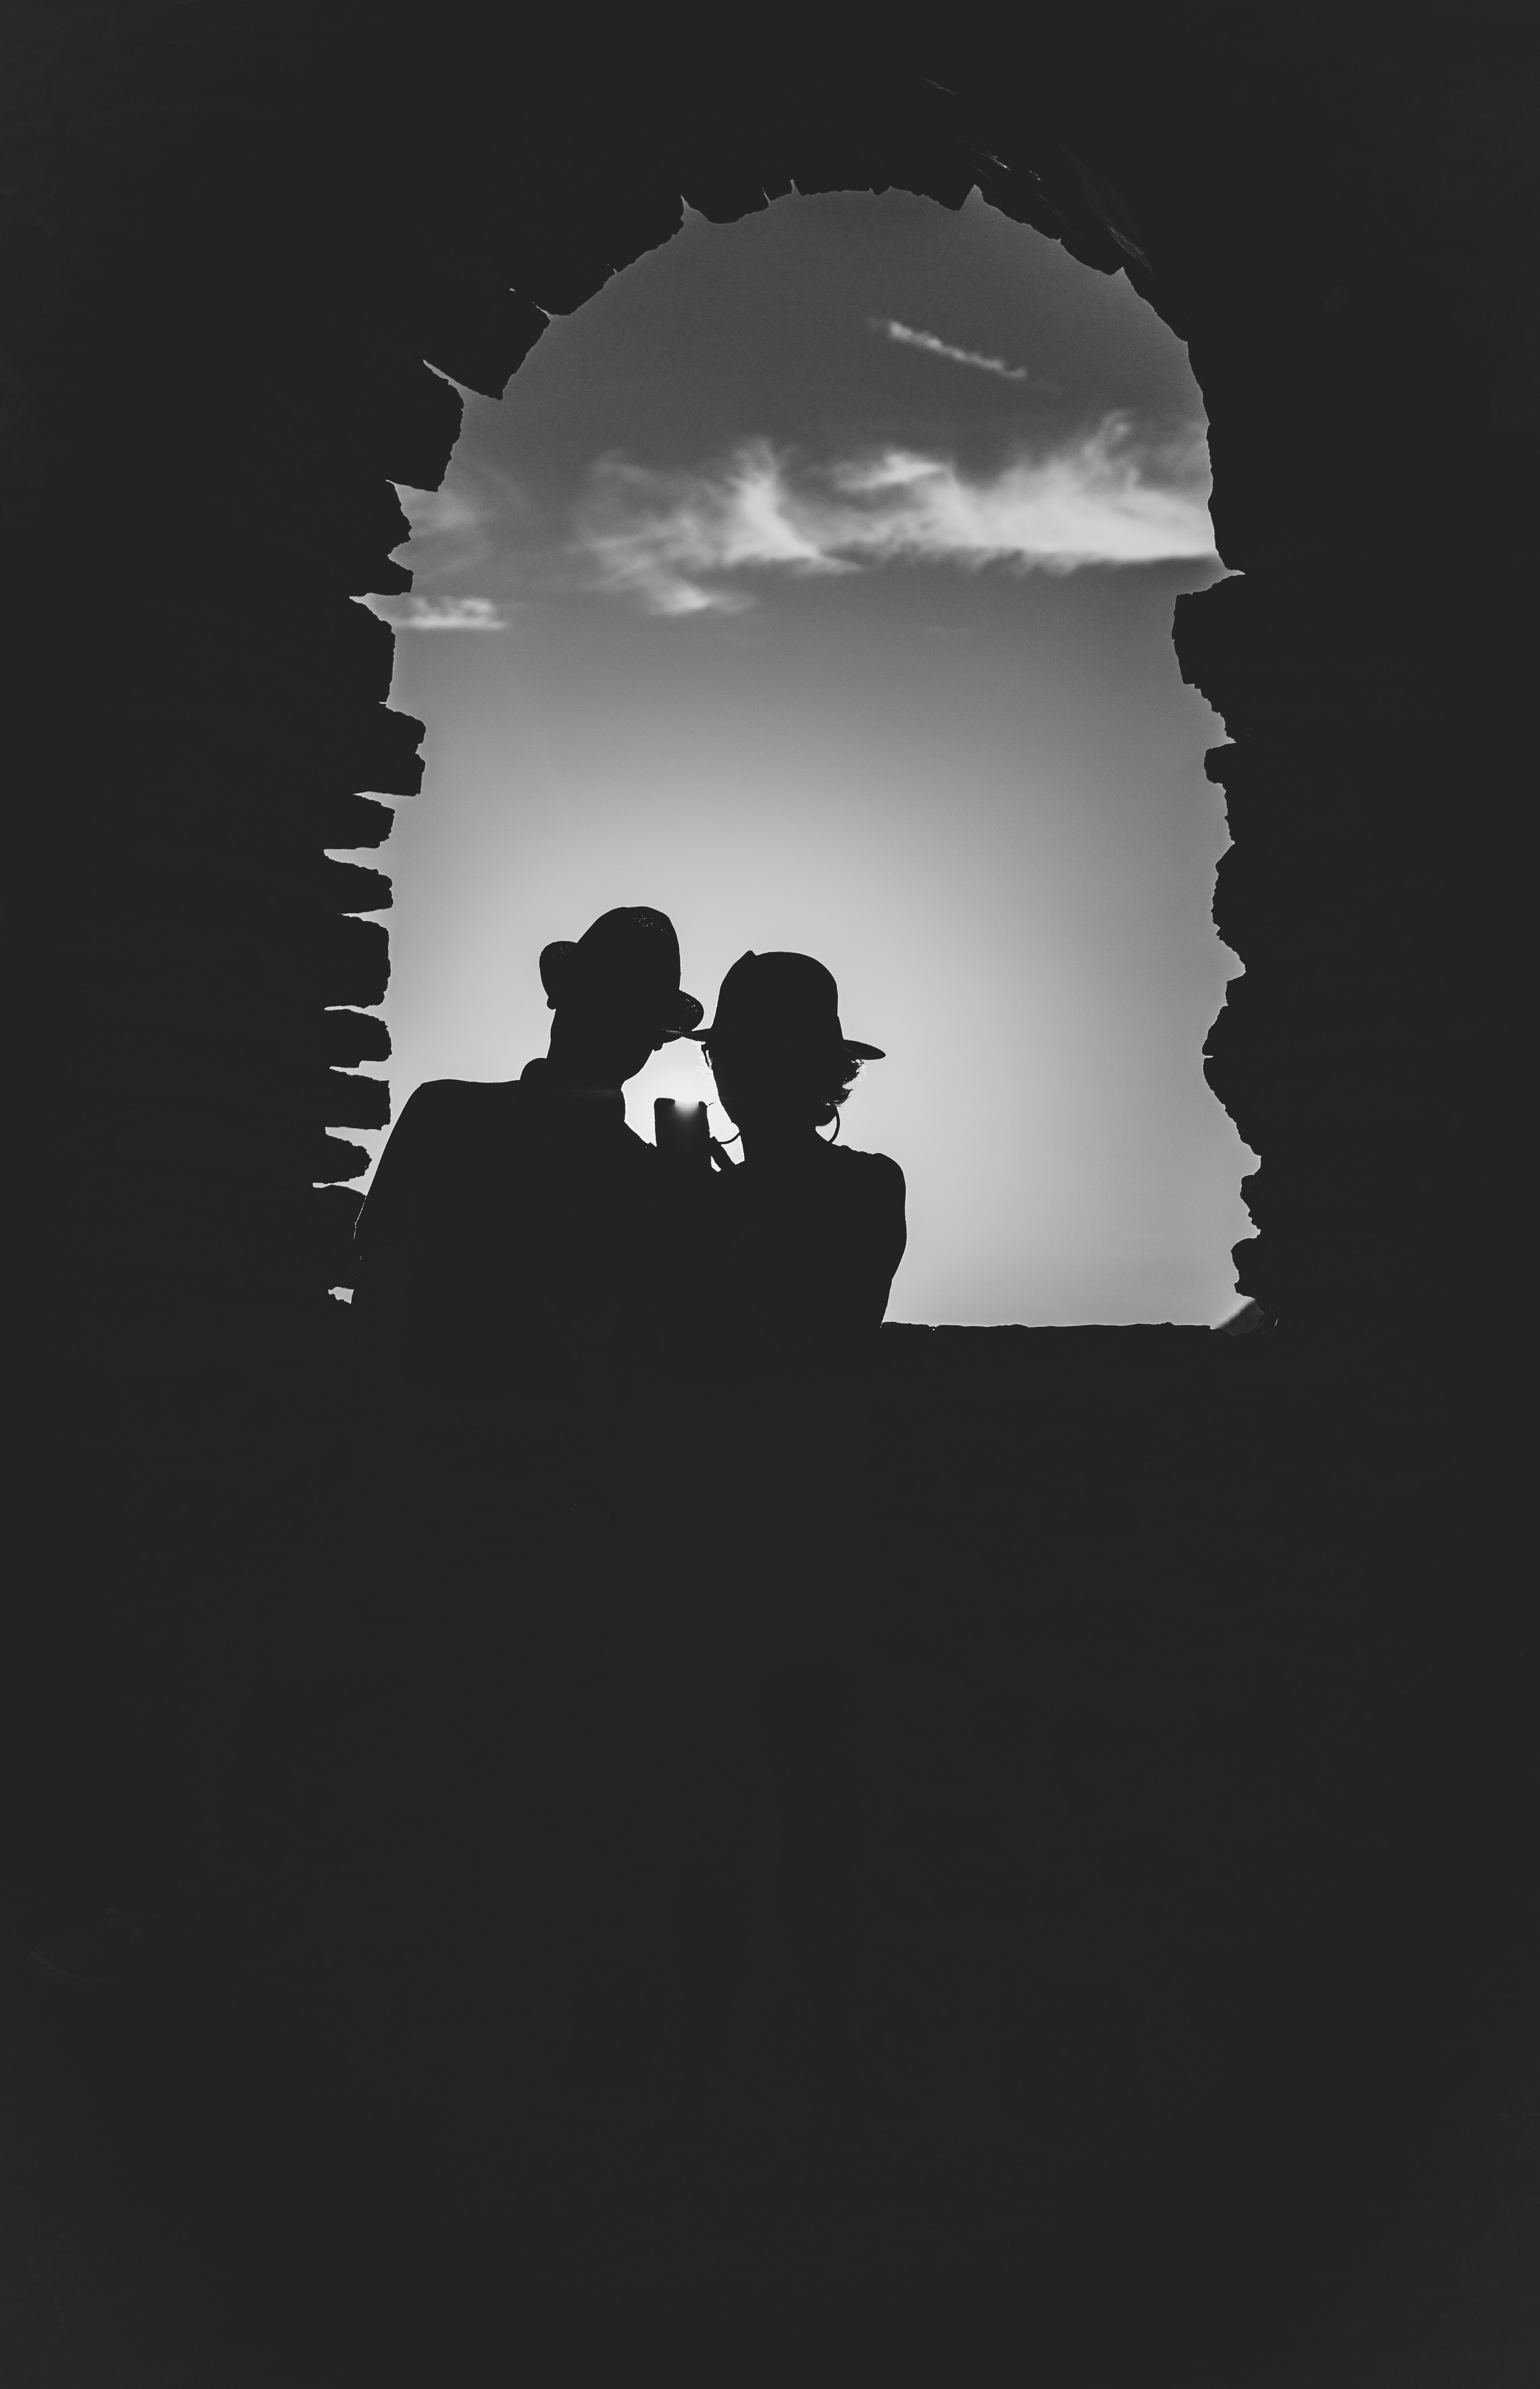 bw, silhouettes, pair, black, couple, sunset, chb, arch cellphone